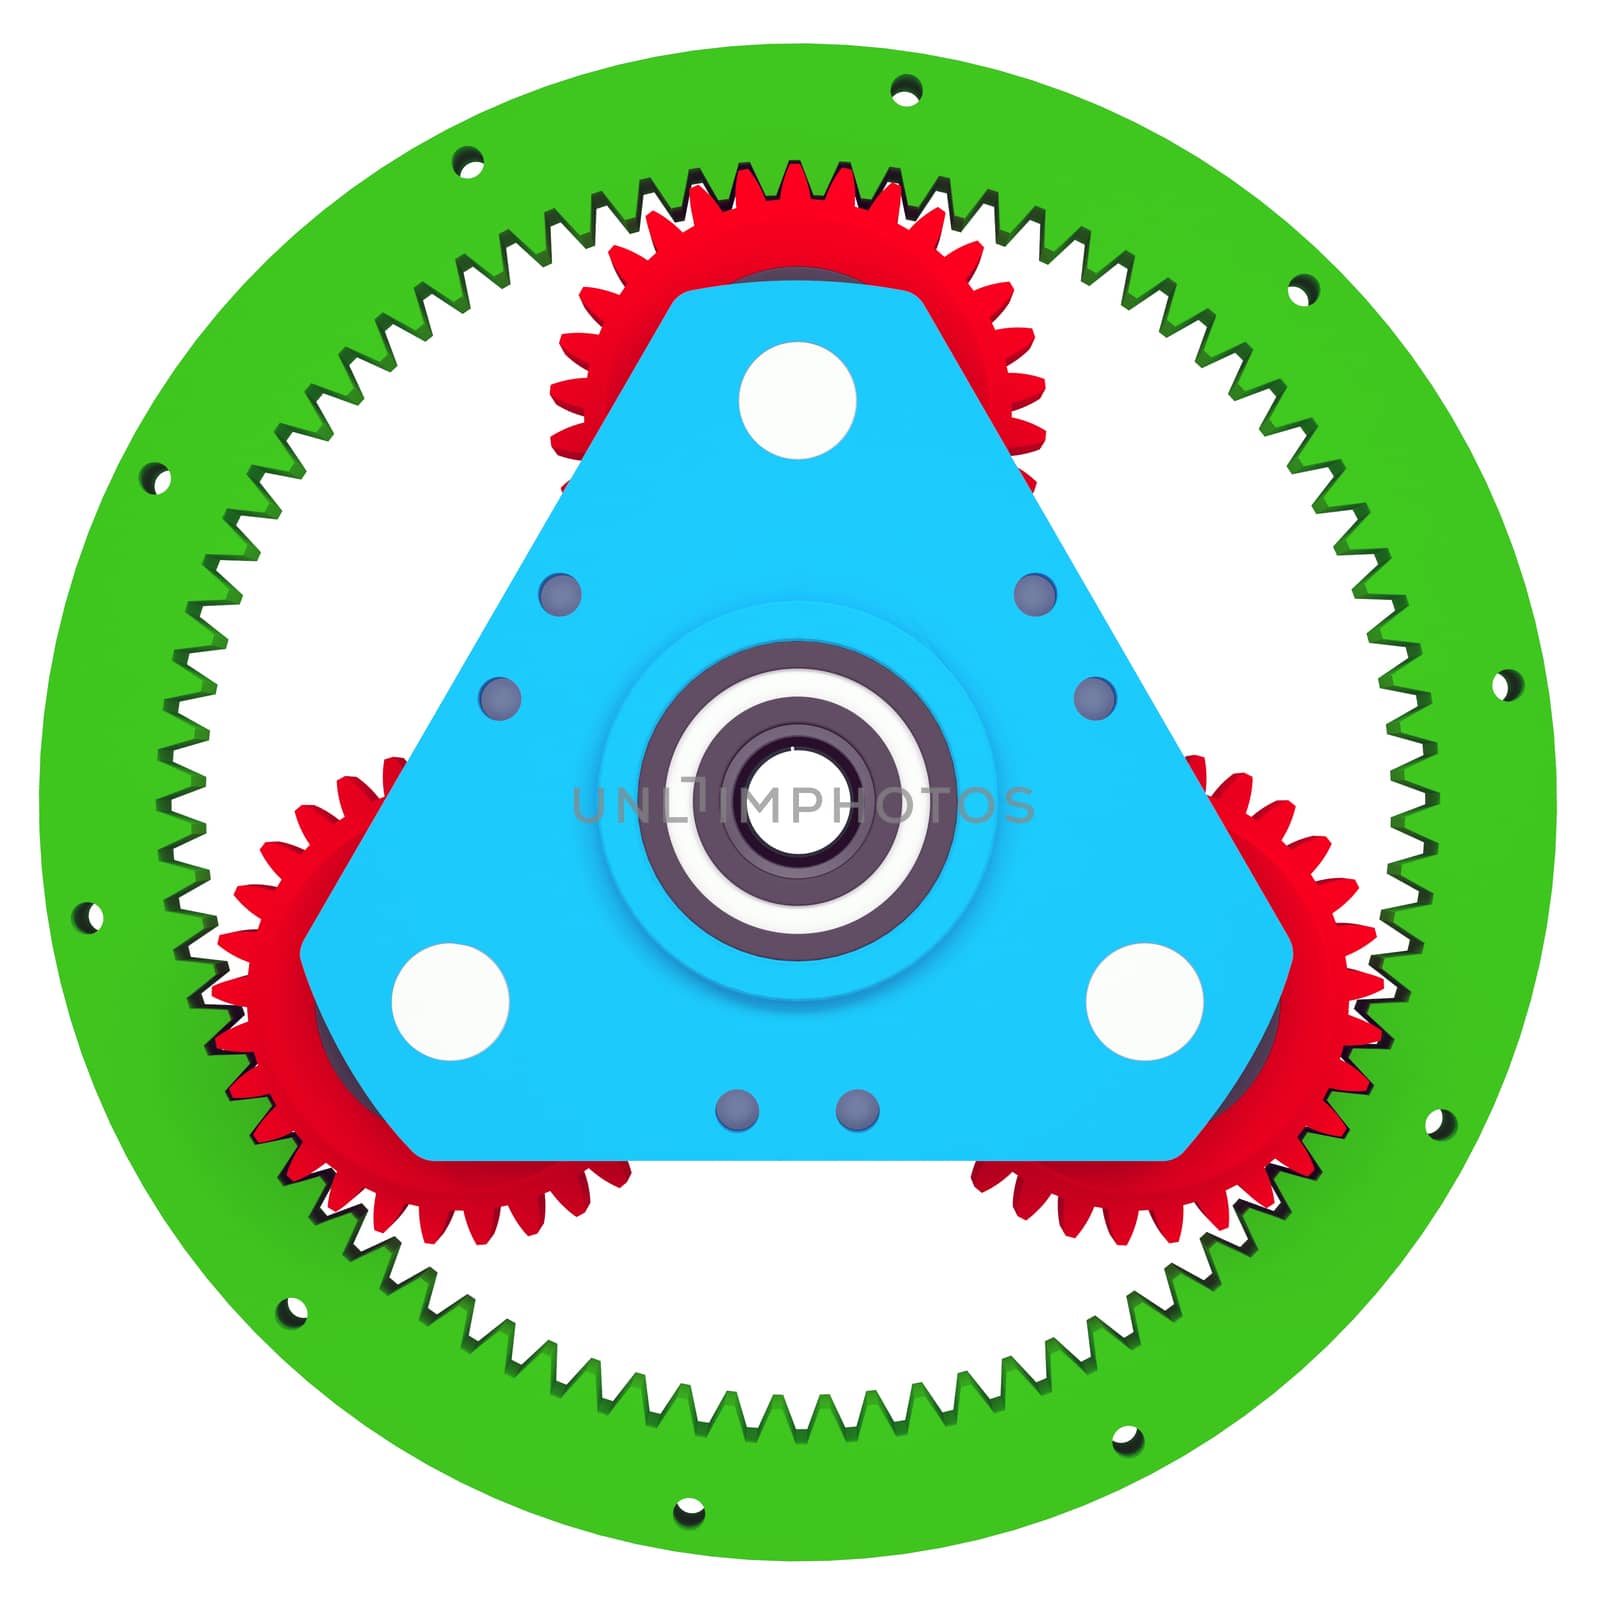 Mechanism of colored gears. Isolated render on a white background